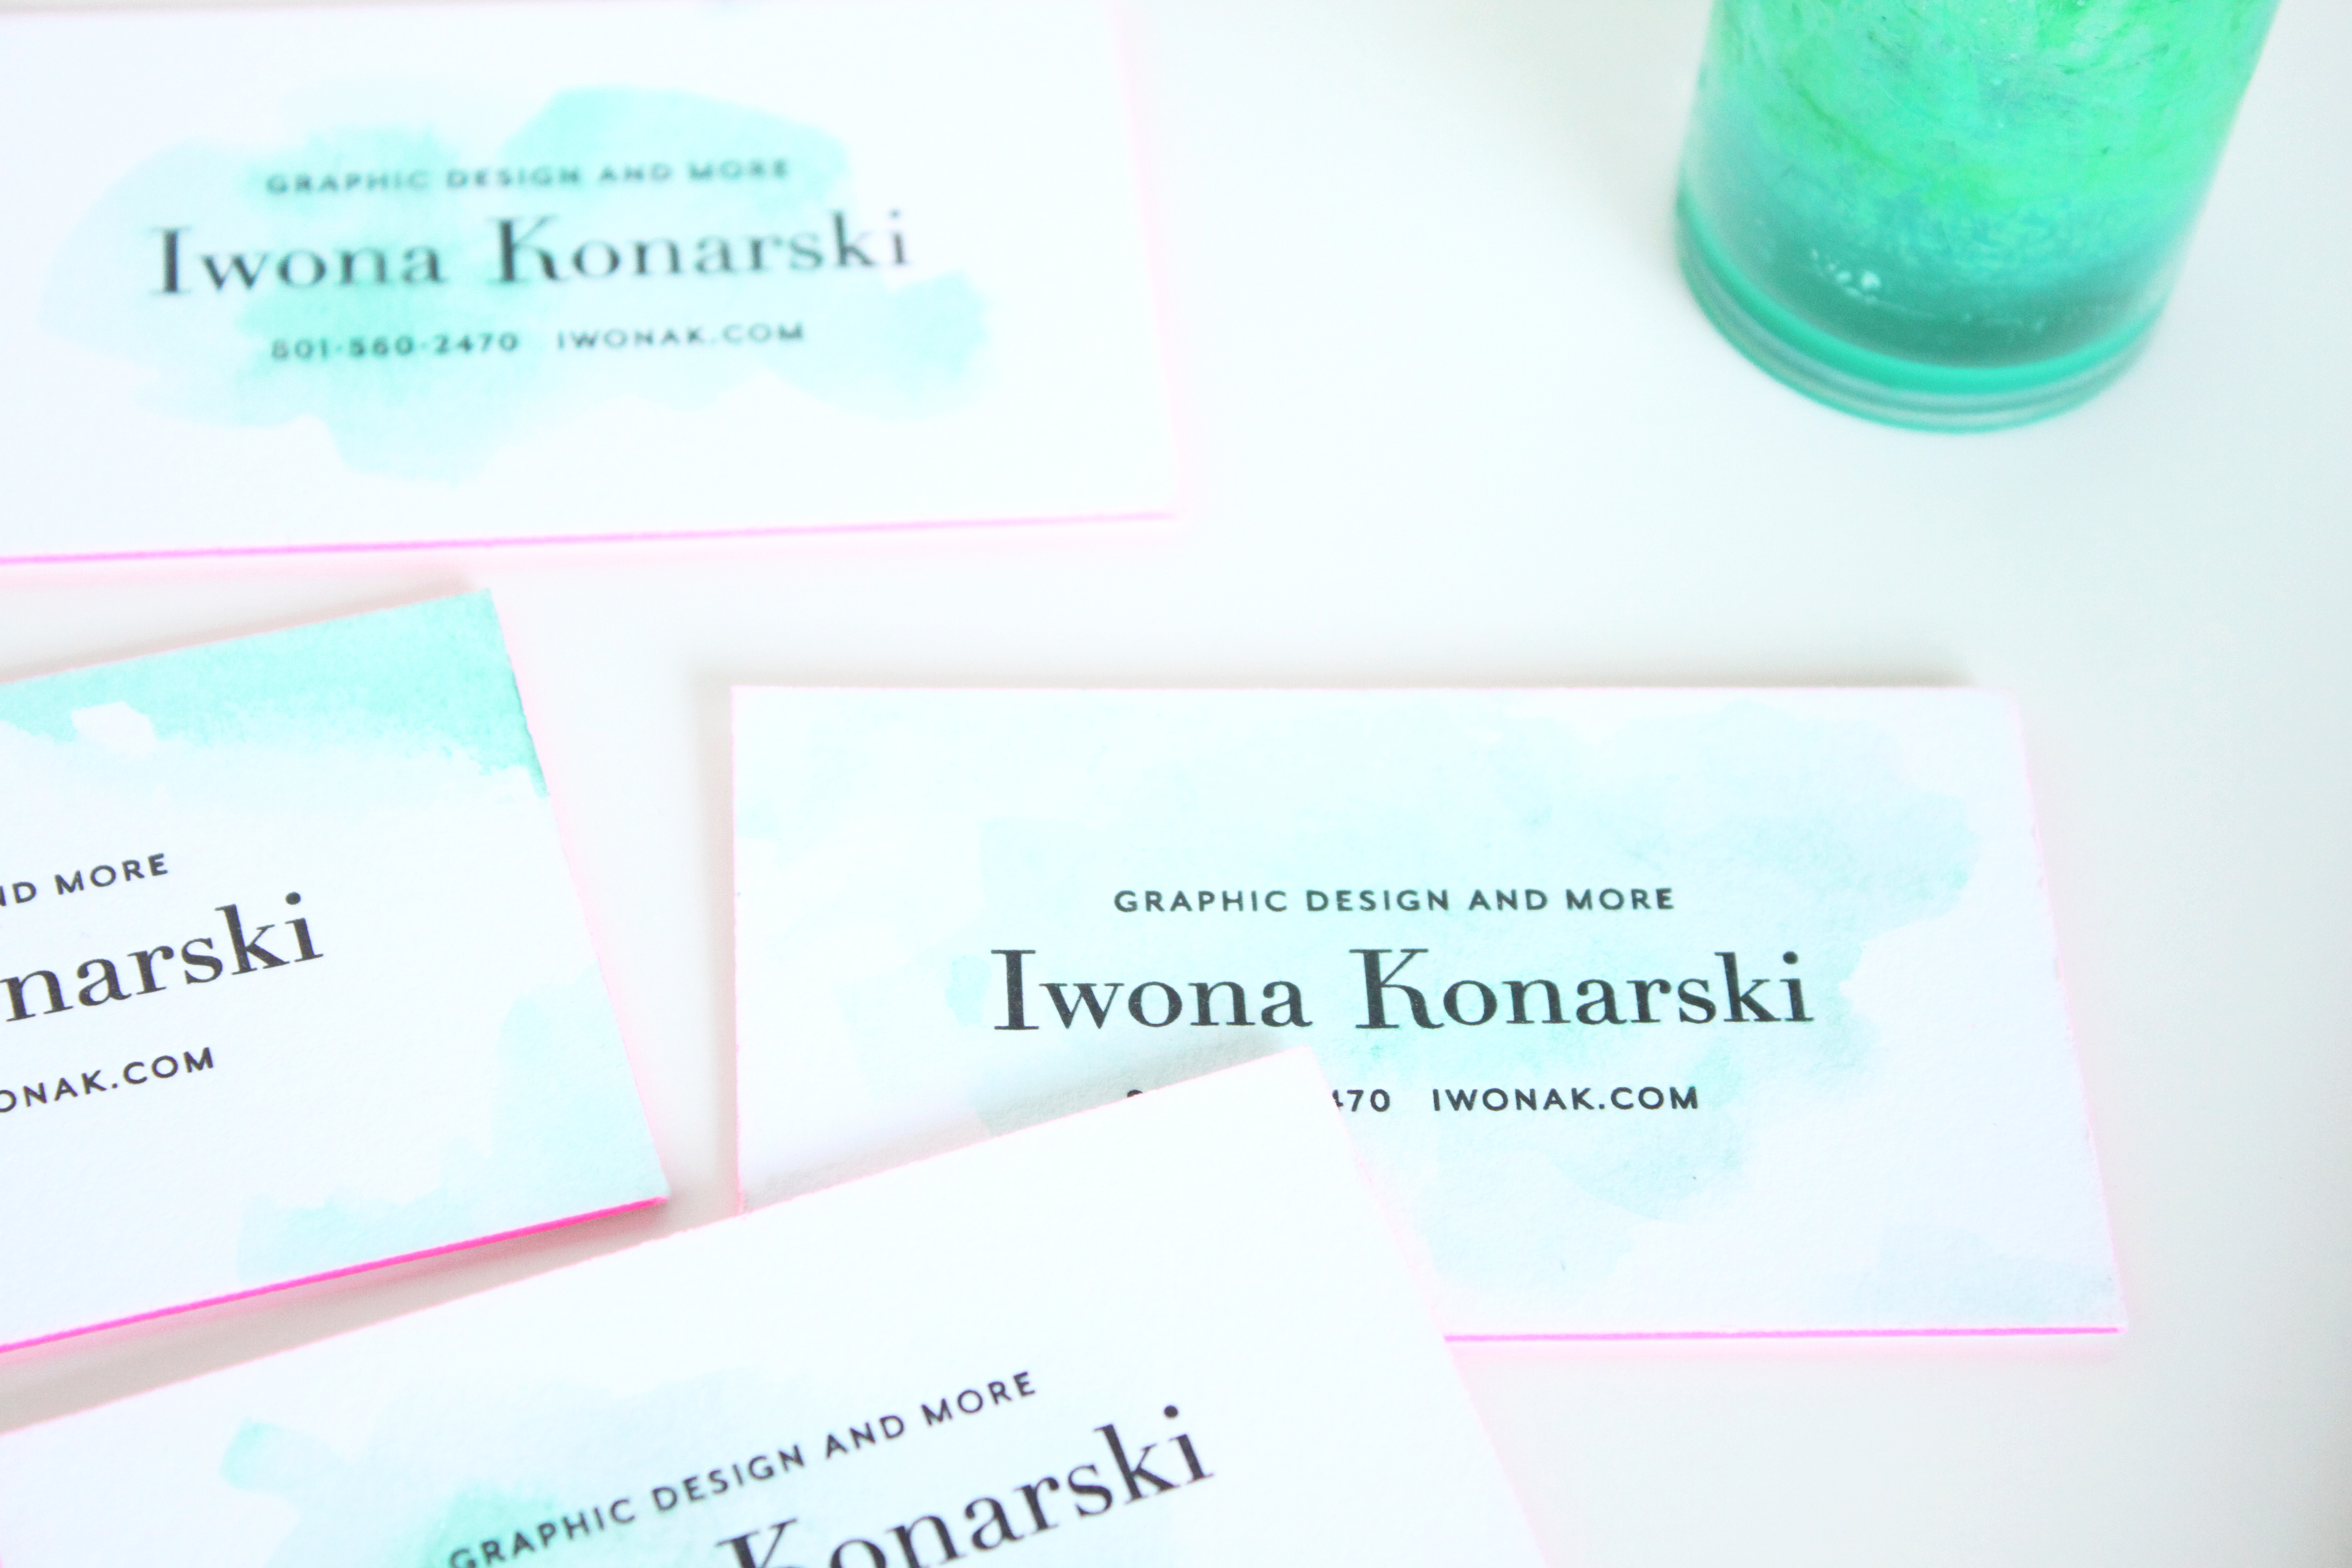 Letterpress + Watercolor + pink edge business cards | Designed by IwonaK.com